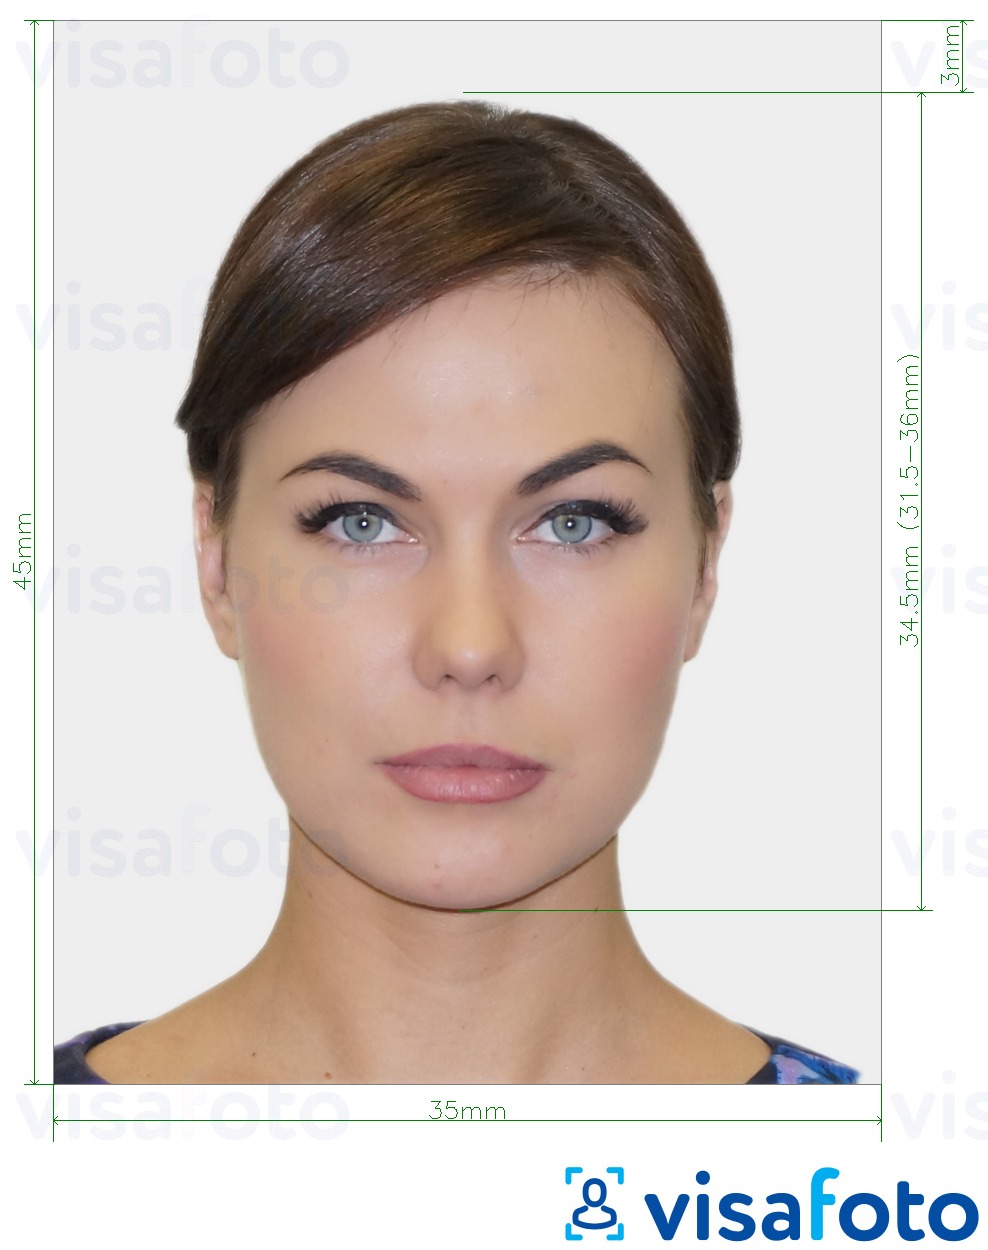 Example of photo for Belgium passport 35x45 mm (3.5x4.5 cm) with exact size specification